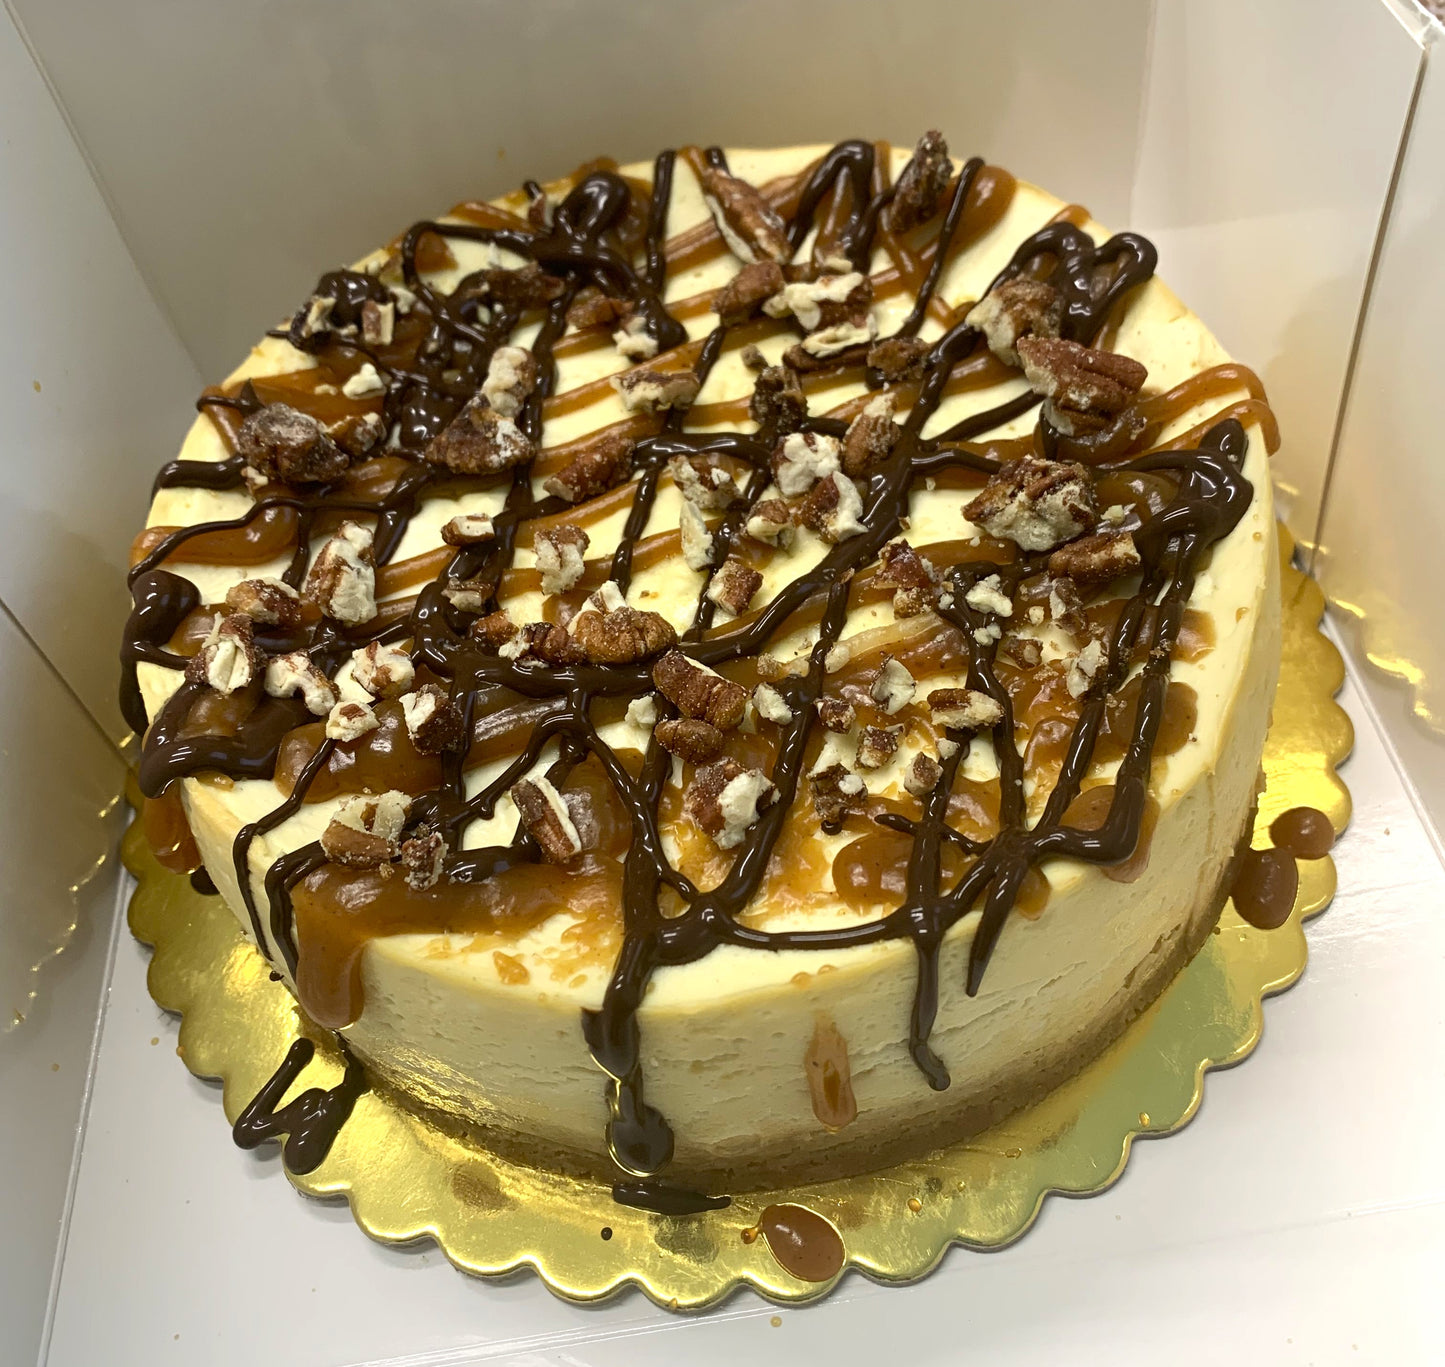 Baked "New York Style" Cheesecake